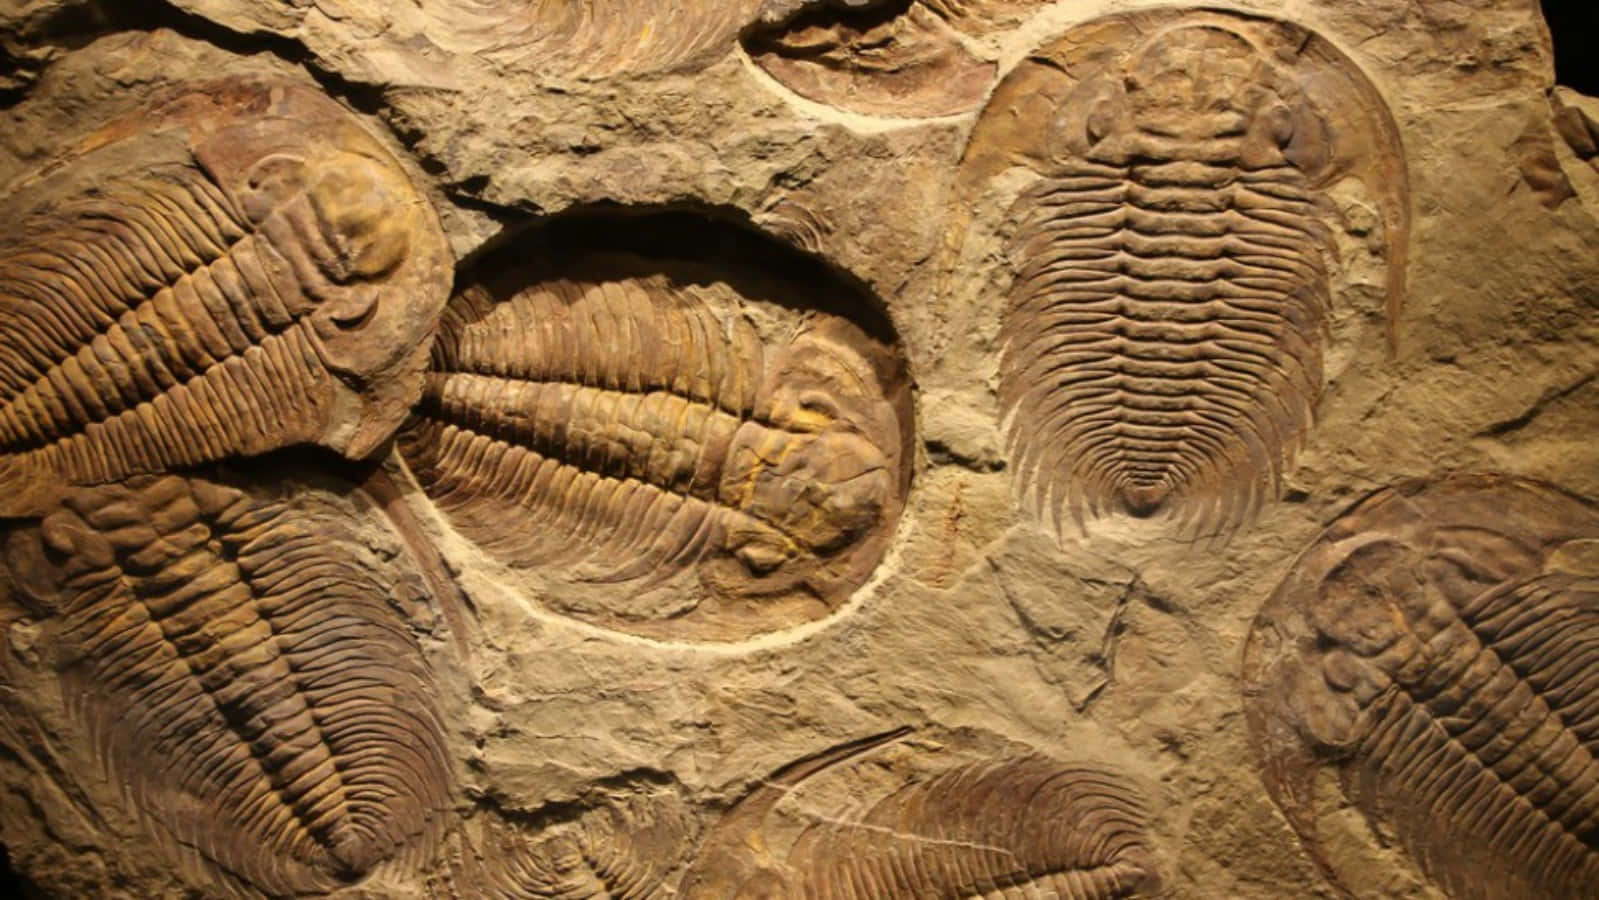 A Display Of Fossils In A Museum